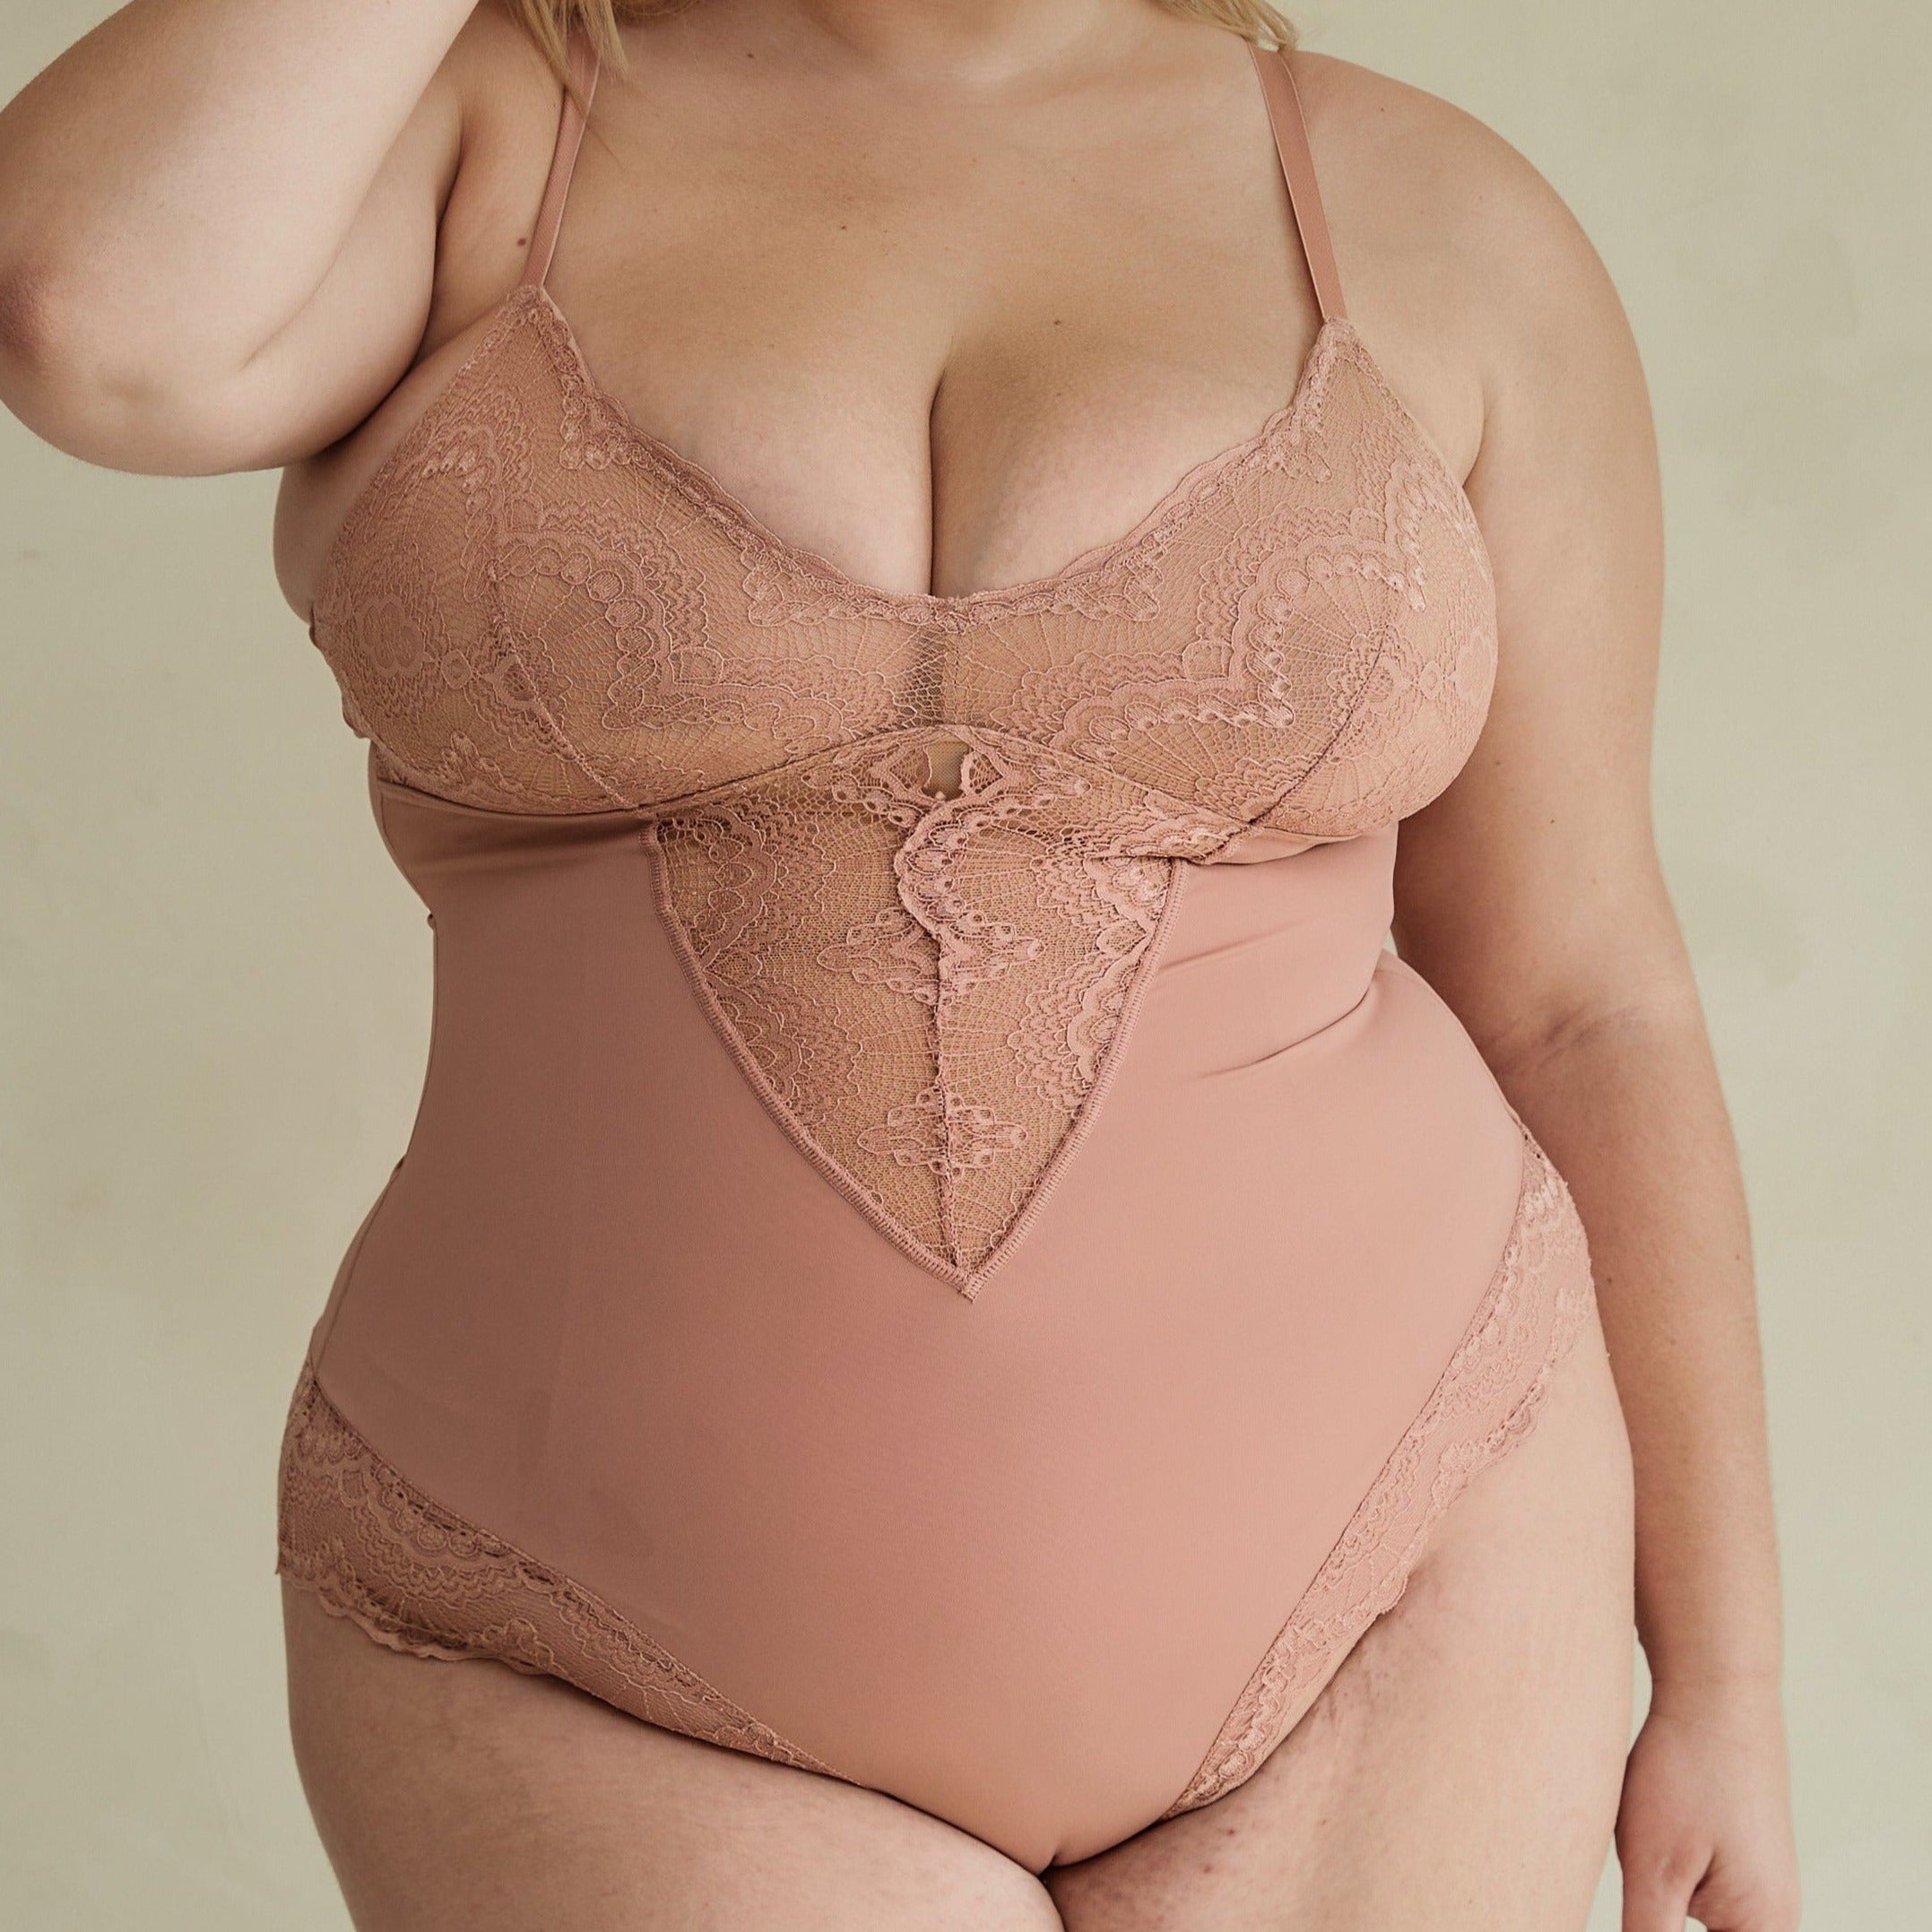 Pinsy Shapewear hugs Your curves in all the right places while keepi